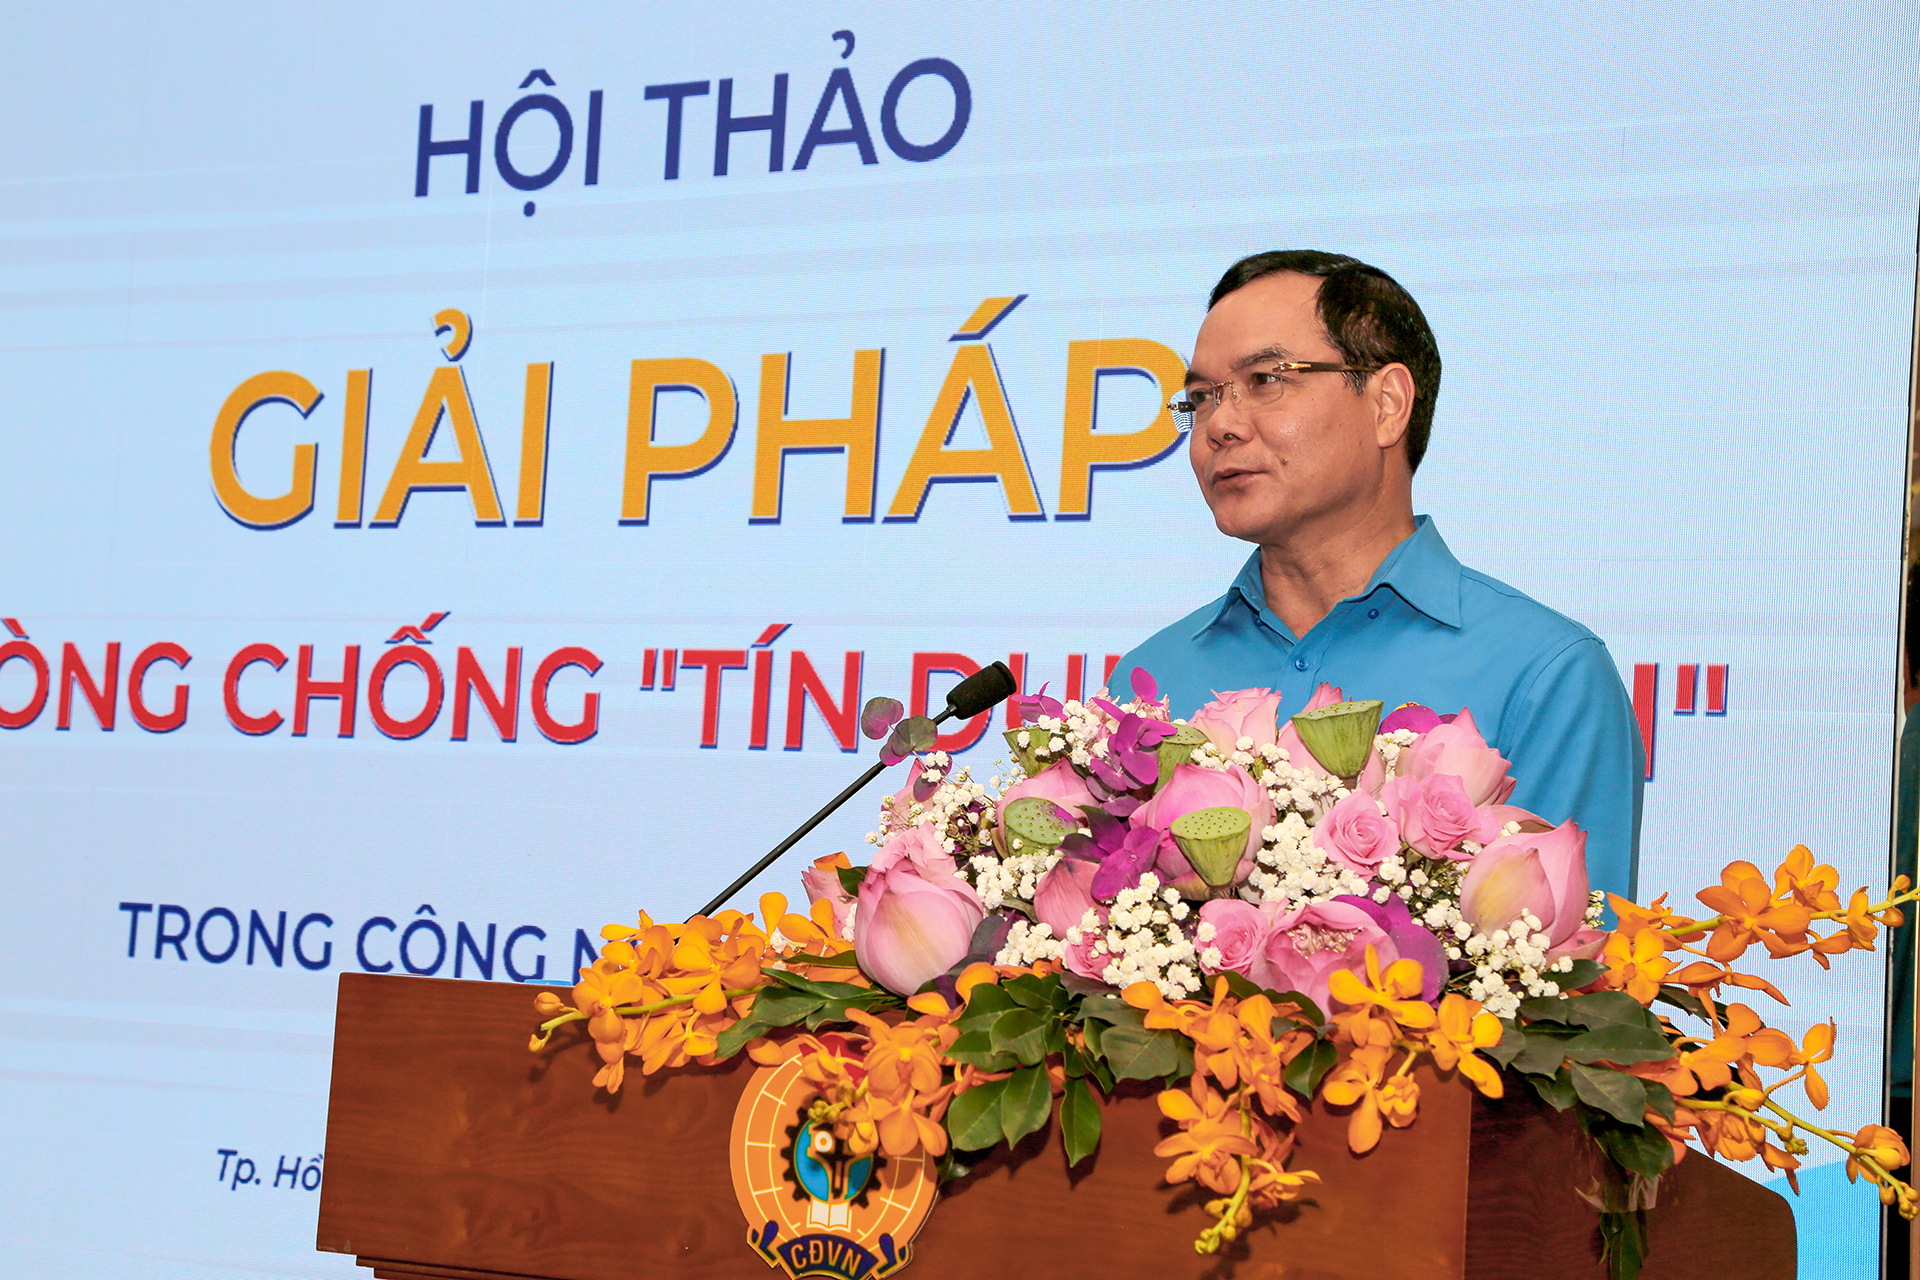 Mr Nguyen Dinh Khang (Member of the Central Committee of the Party, Chairman of the Vietnam General Confederation of Labor) gave directions in his speech at the workshop